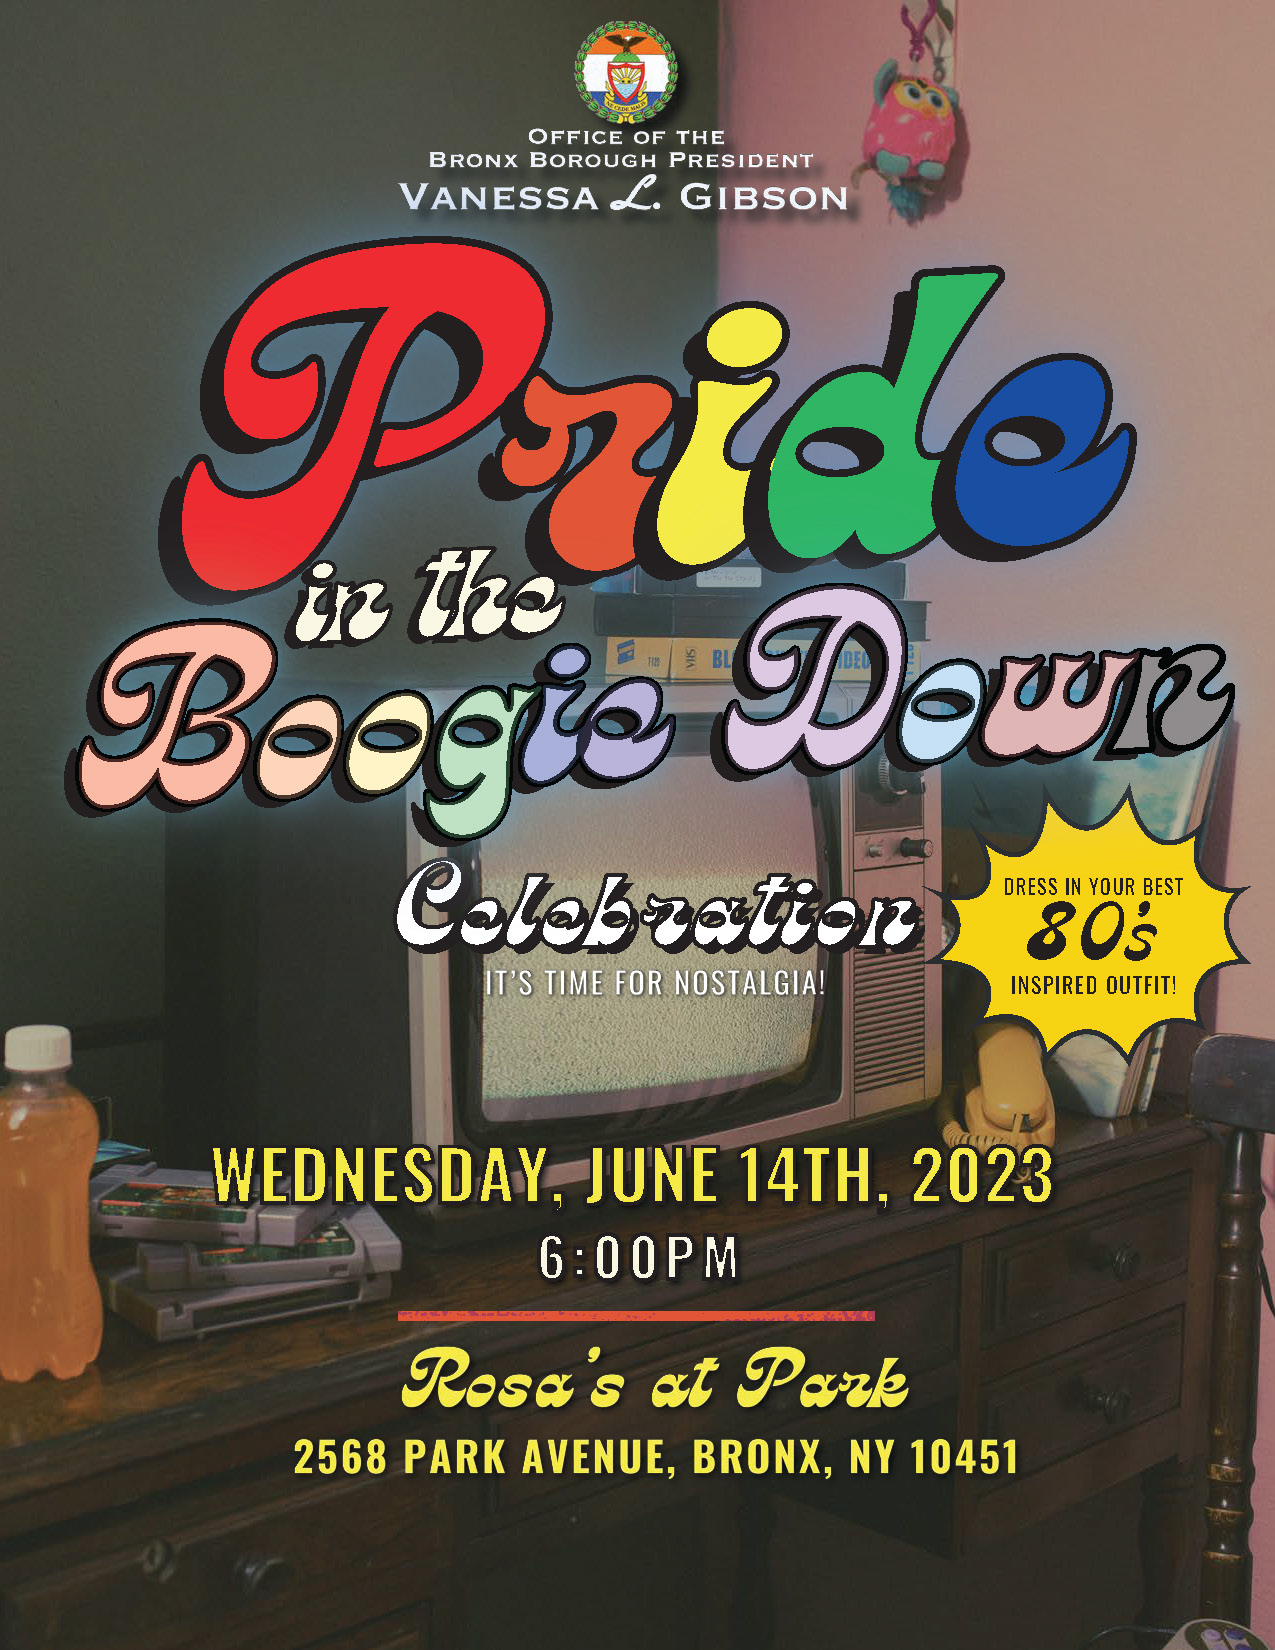 A flyer for the Pride in the Boogie Down Celebration on June 14, 2023 at 6 PM